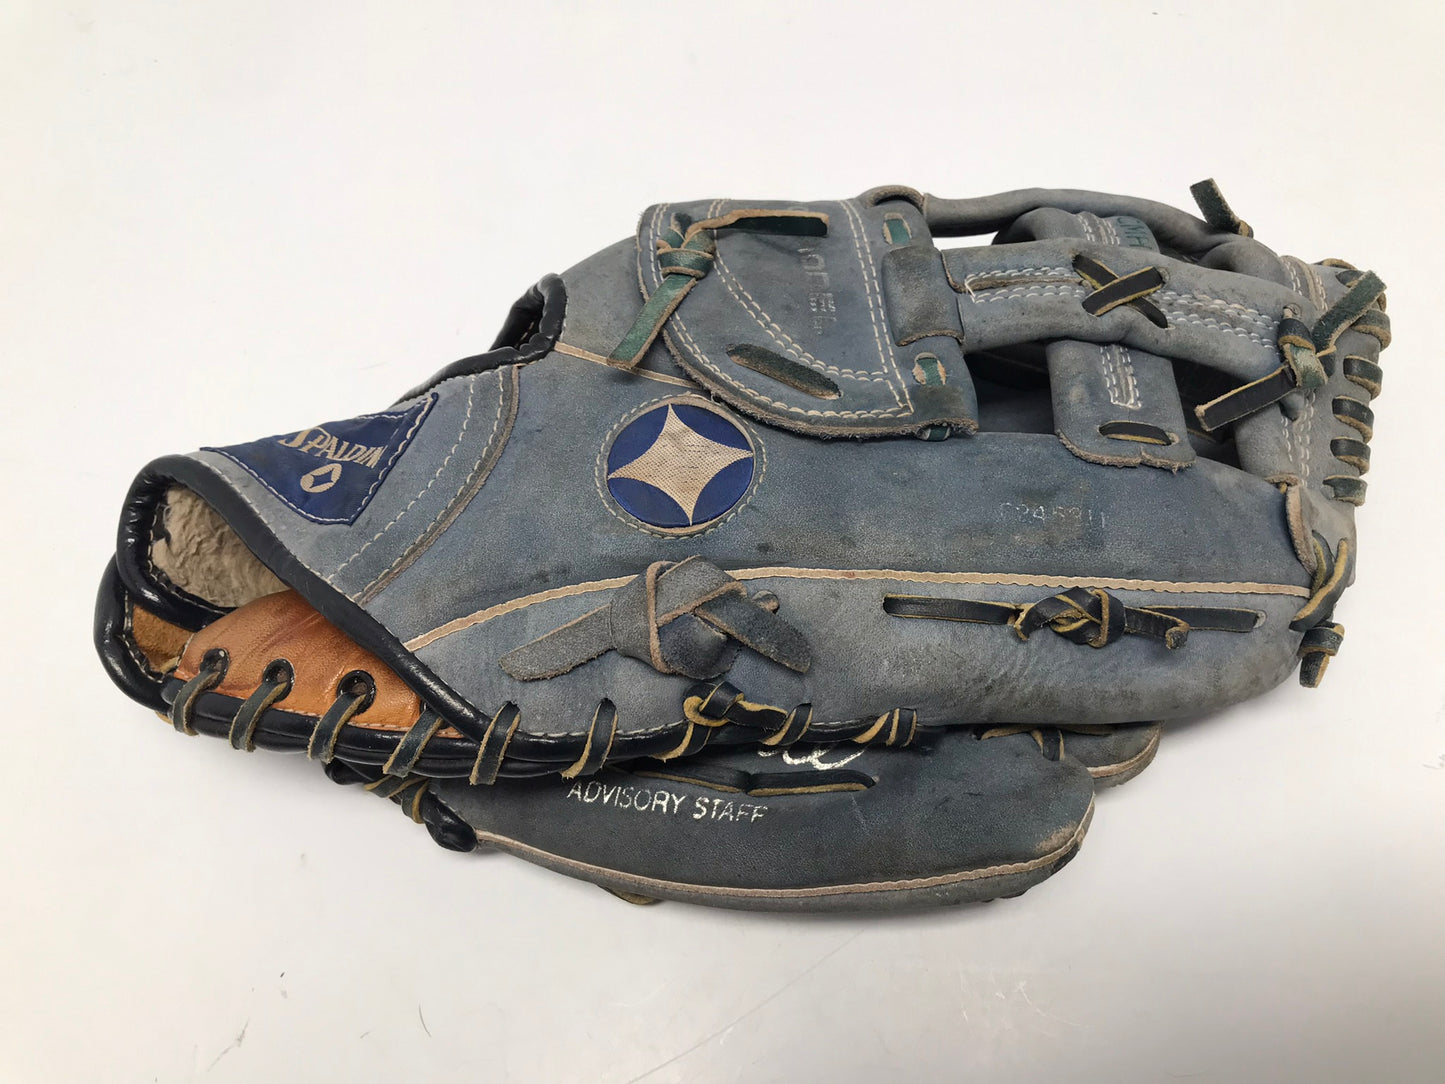 Baseball Glove Adult Size 12 inch Spalding Blue Leather Fits Left Hand Minor Wear